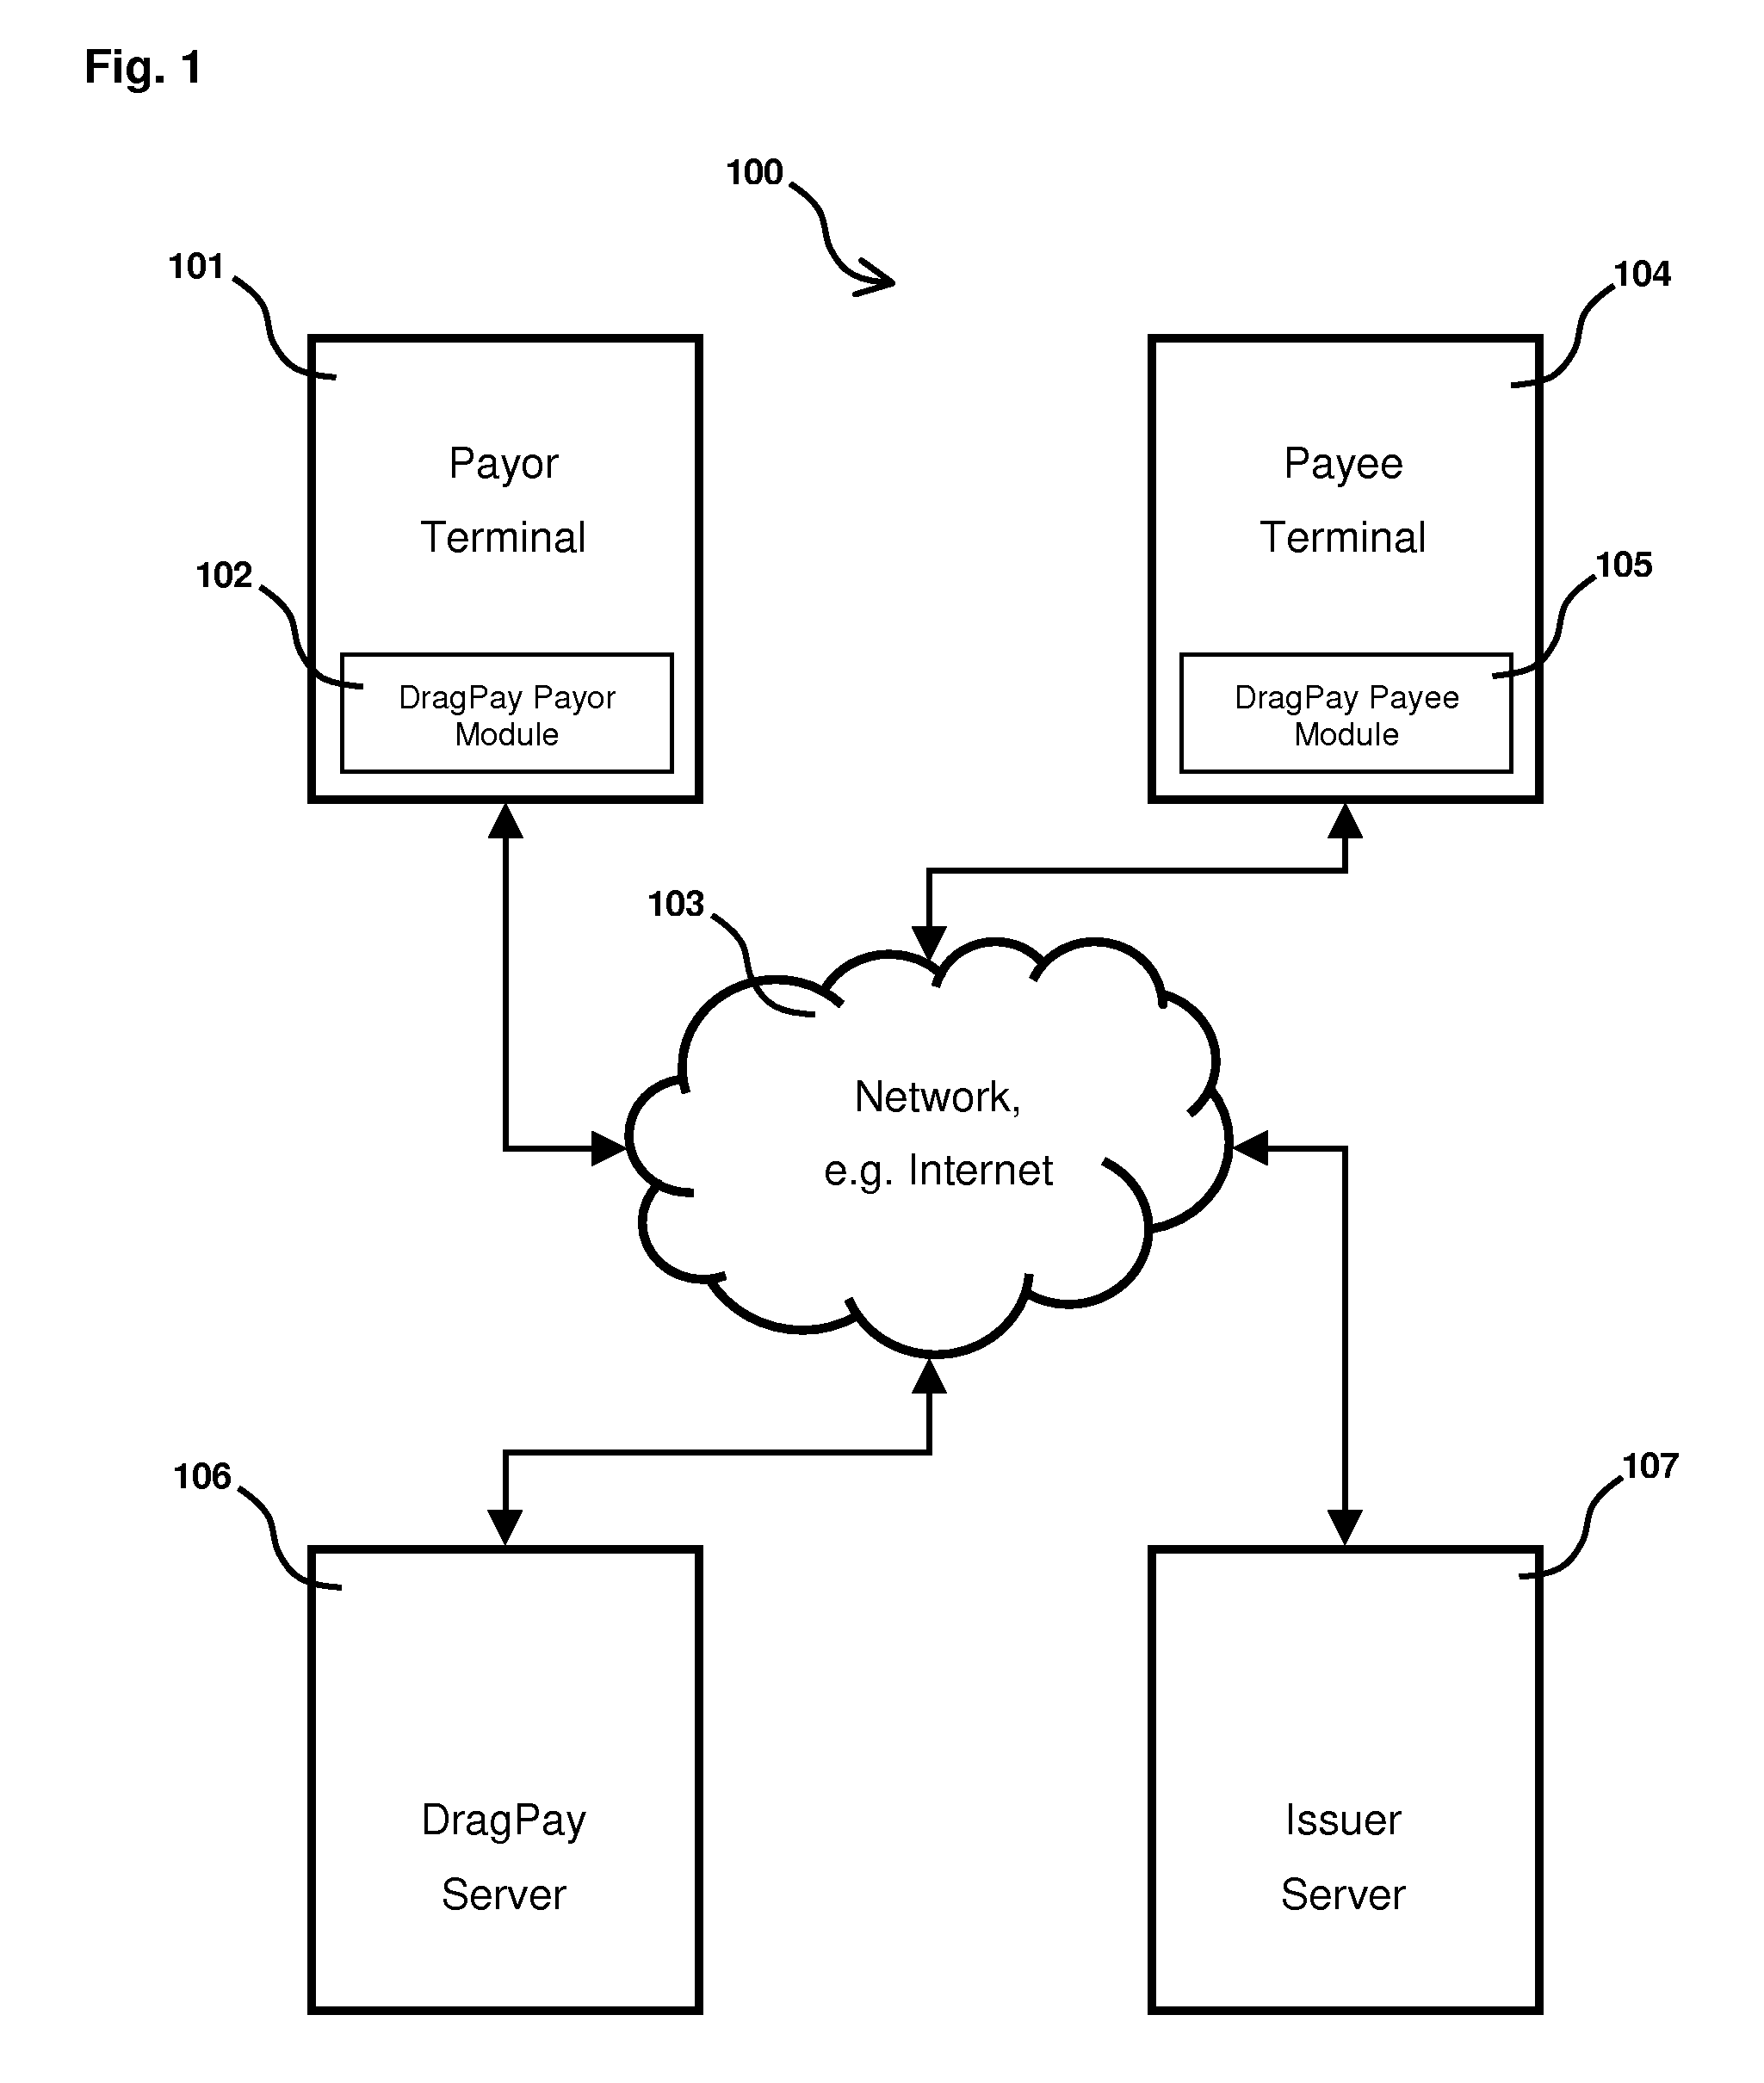 Methods and systems for making a payment and/or a donation via a network, such as the Internet, using a drag and drop user interface